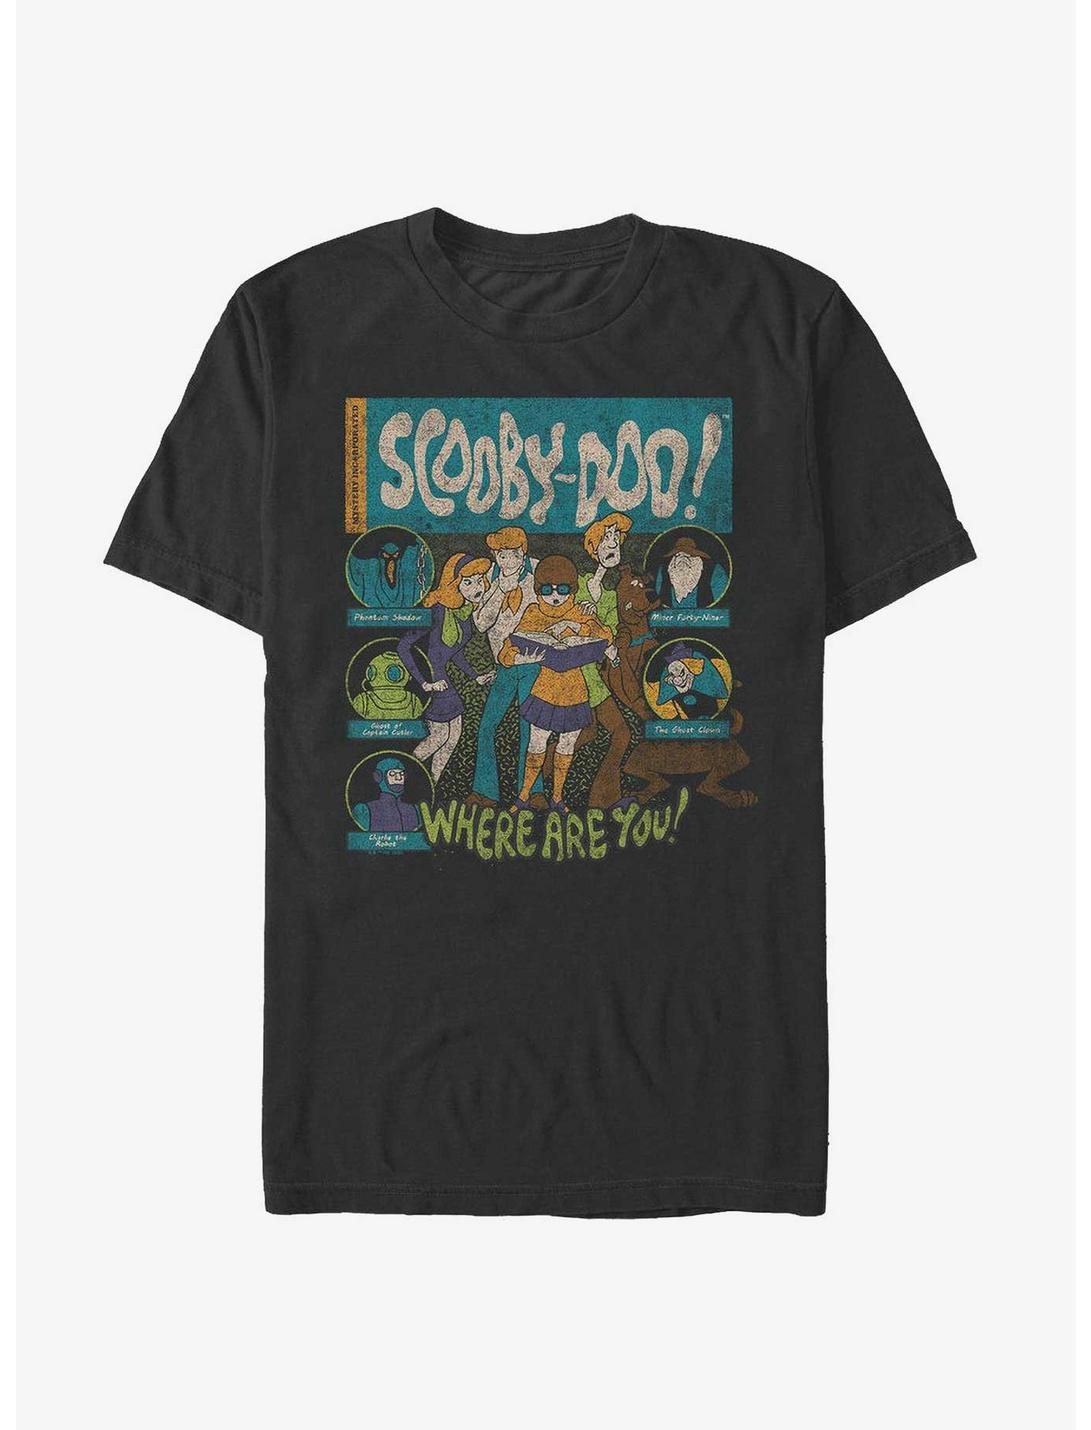 Scooby Doo Mystery Poster T-Shirt, BLACK, hi-res